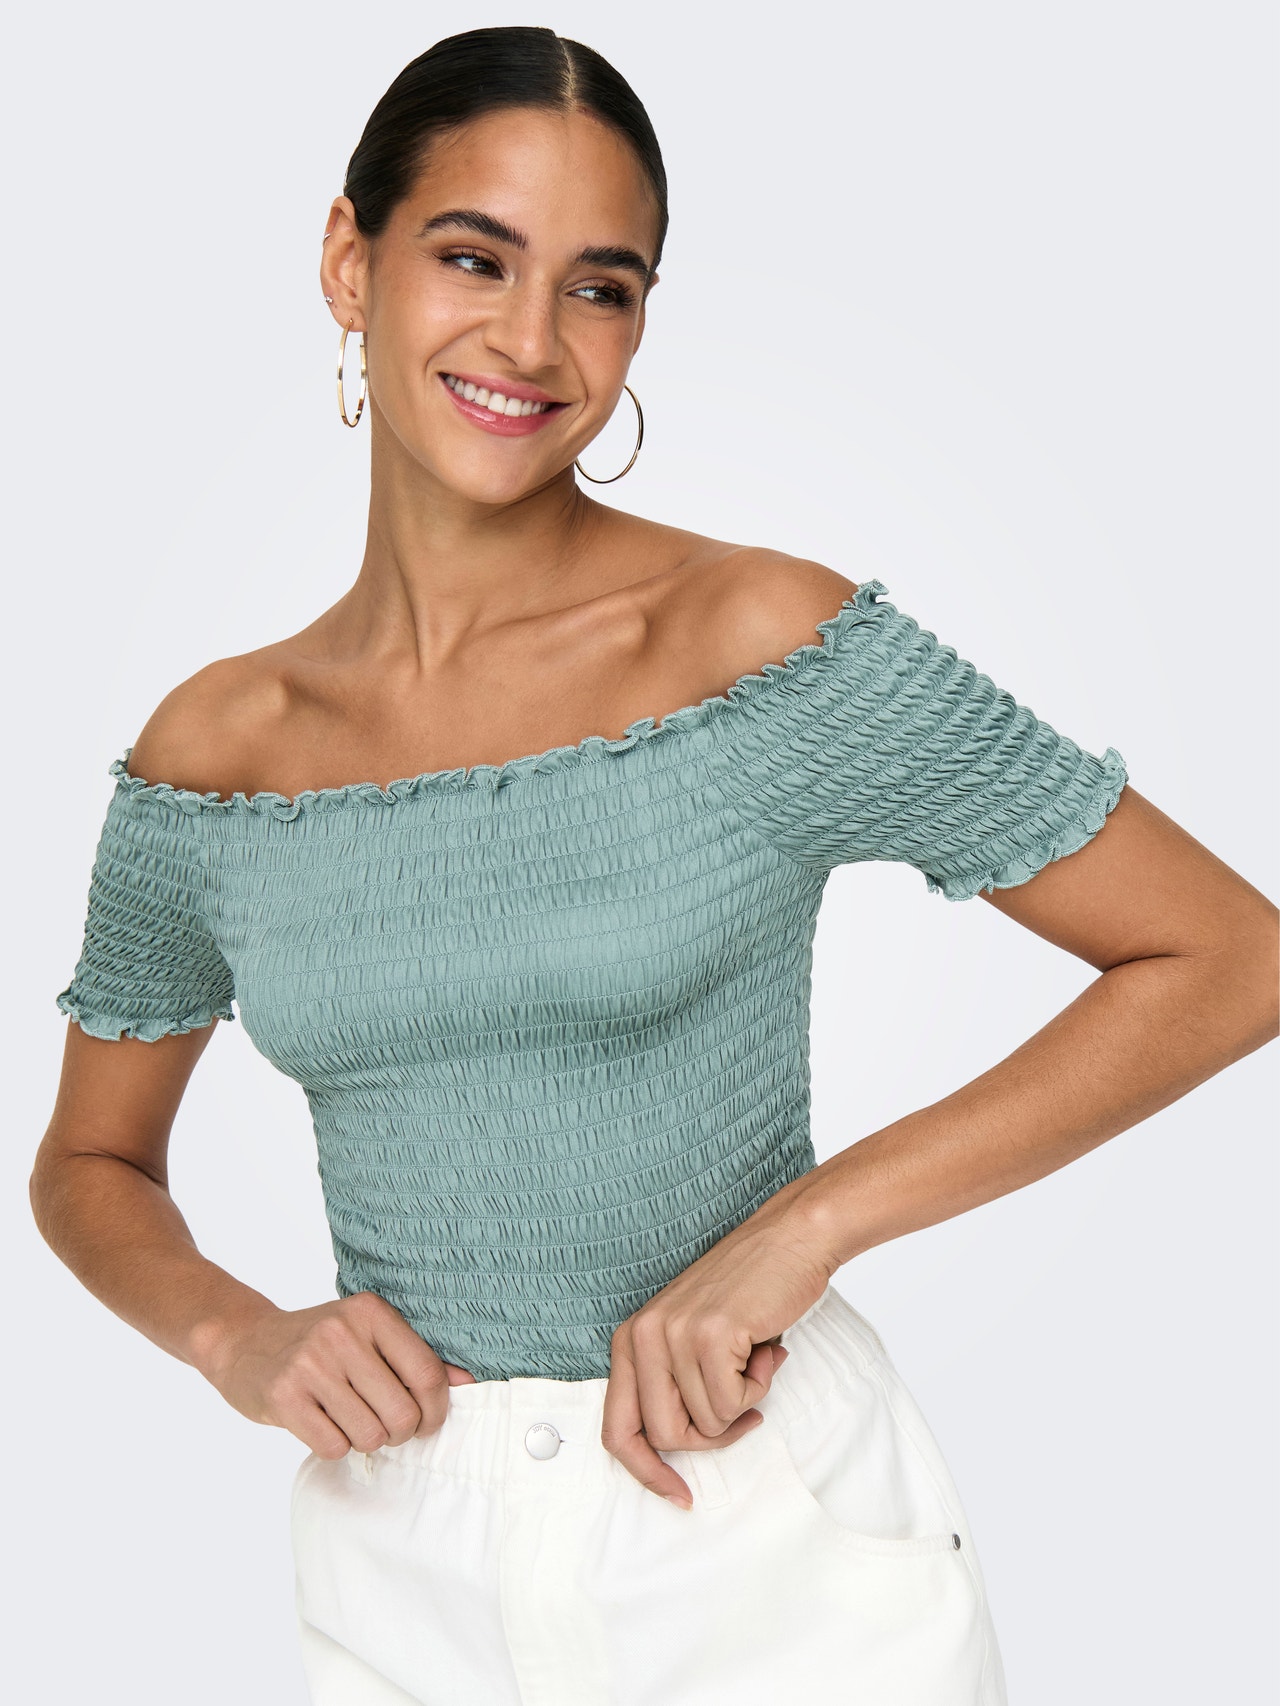 ONLY Off shoulder top med smock -Chinois Green - 15238561